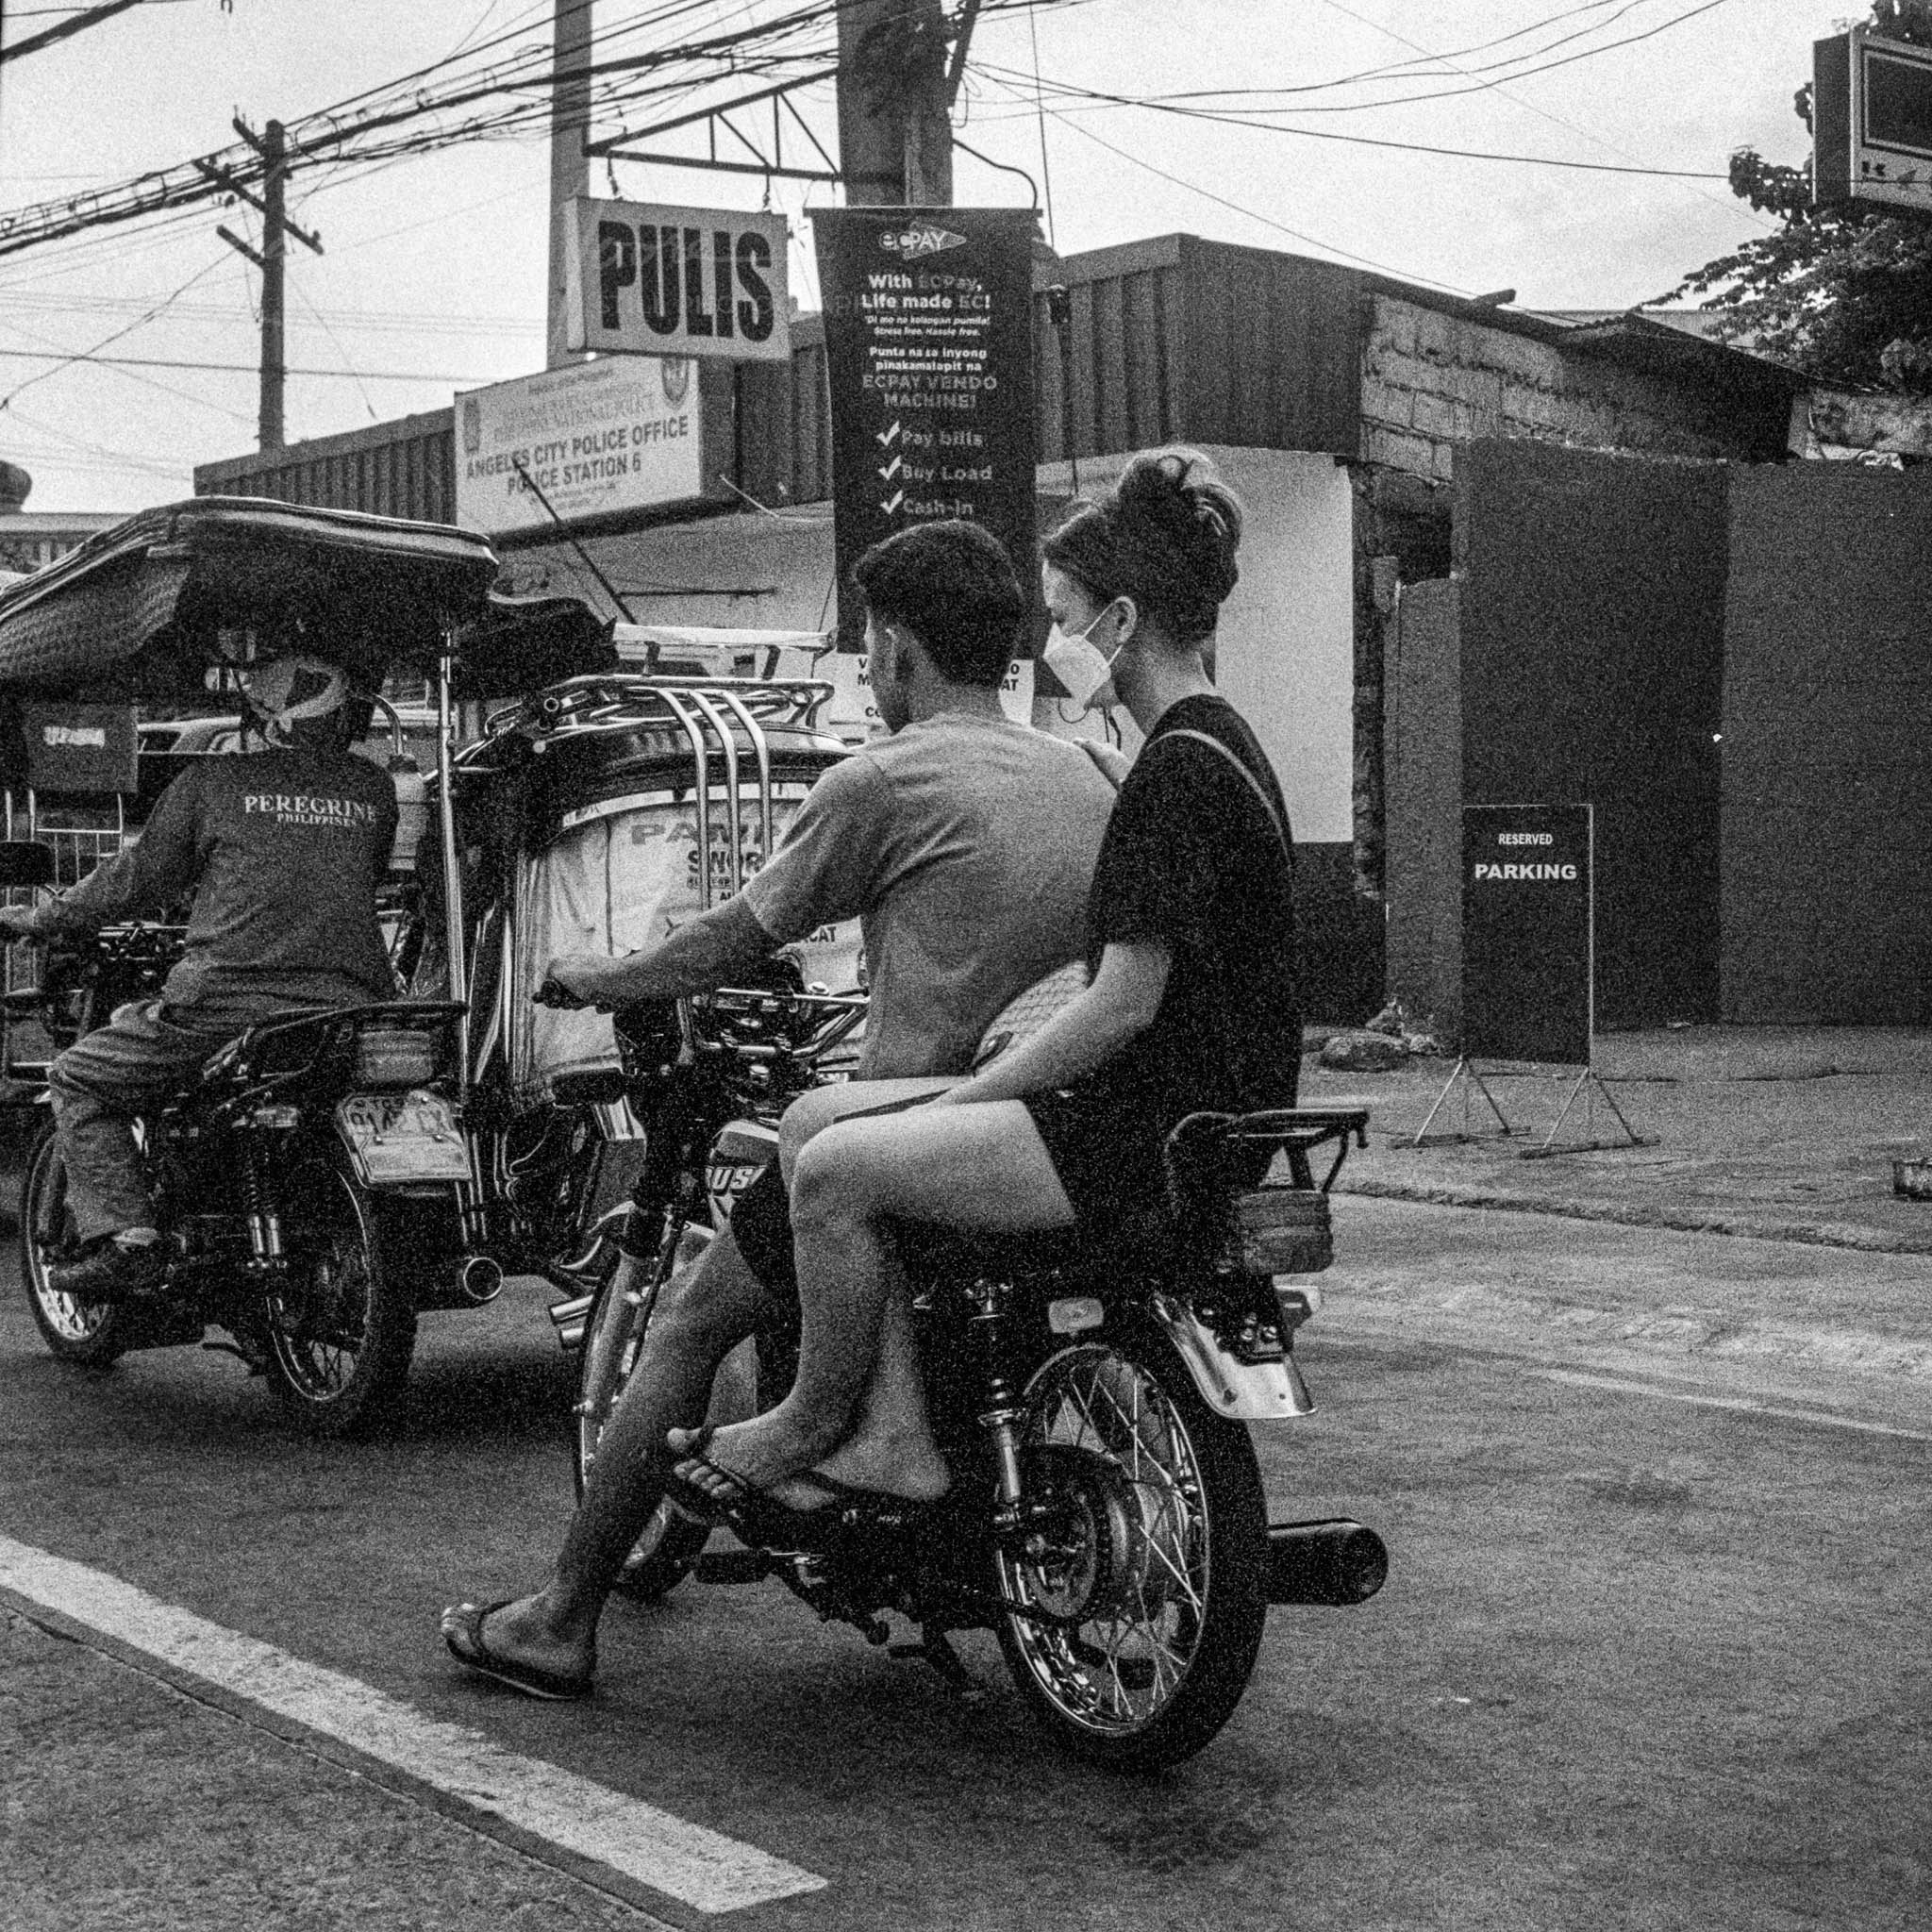 Street Scene with Motorbike and Tricycle in Philippines, Black and White Photography